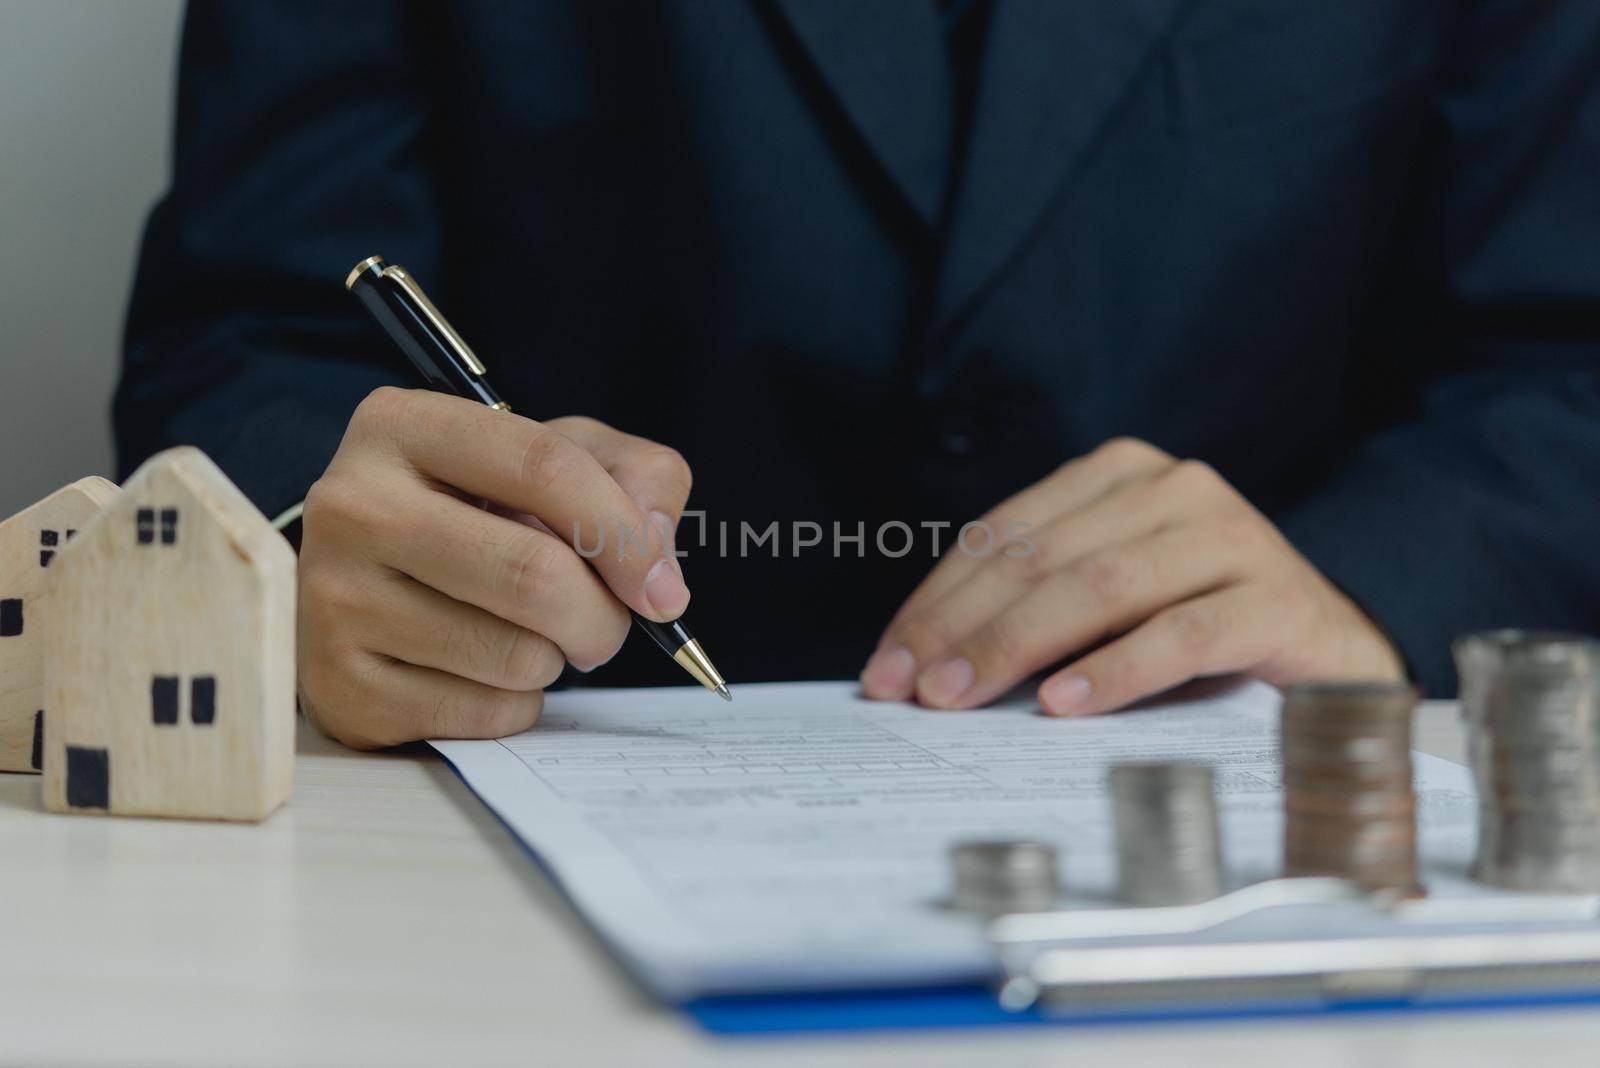 Sign the house approval document. Real estate appraisal, buy and sell houses, business concept finance.businessman holding pen and signing documents at desk